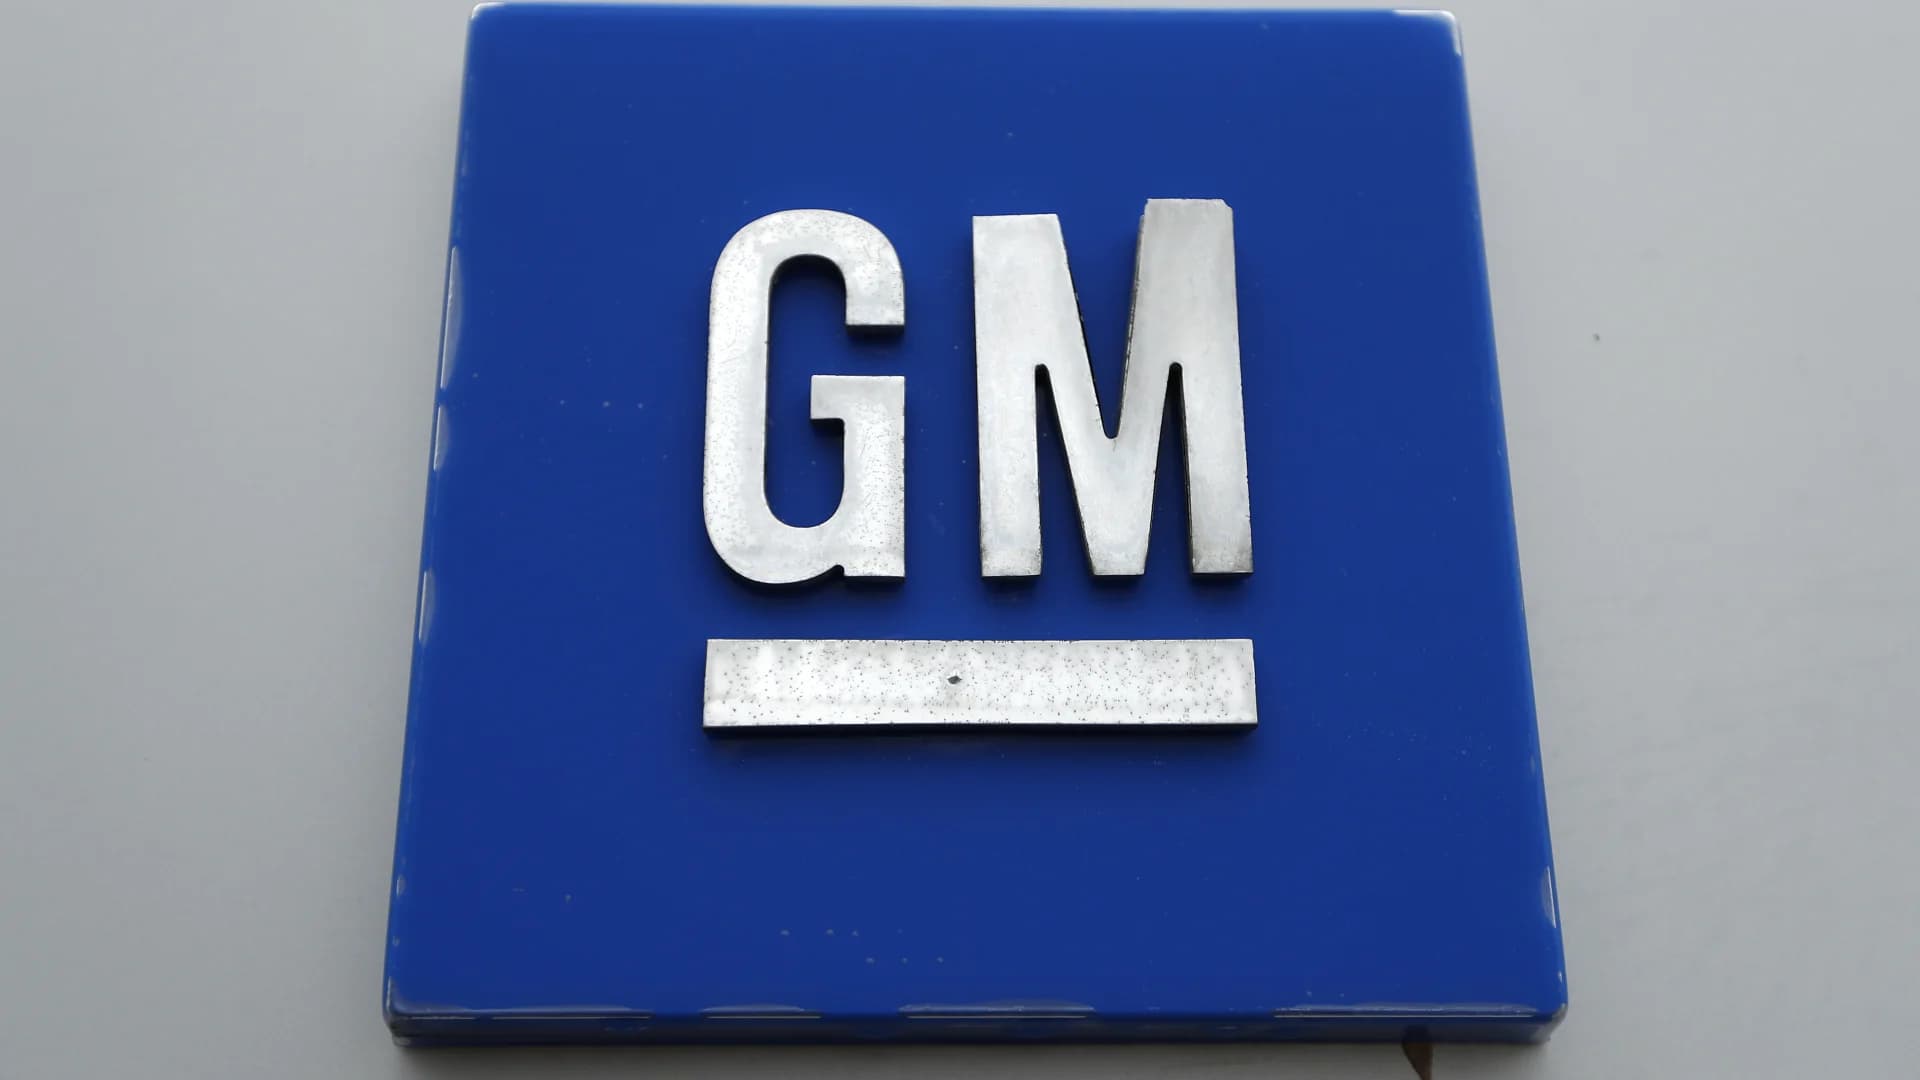 General Motors recalls 688,000 SUVs due to anchor bars that may prevent child seats being installed